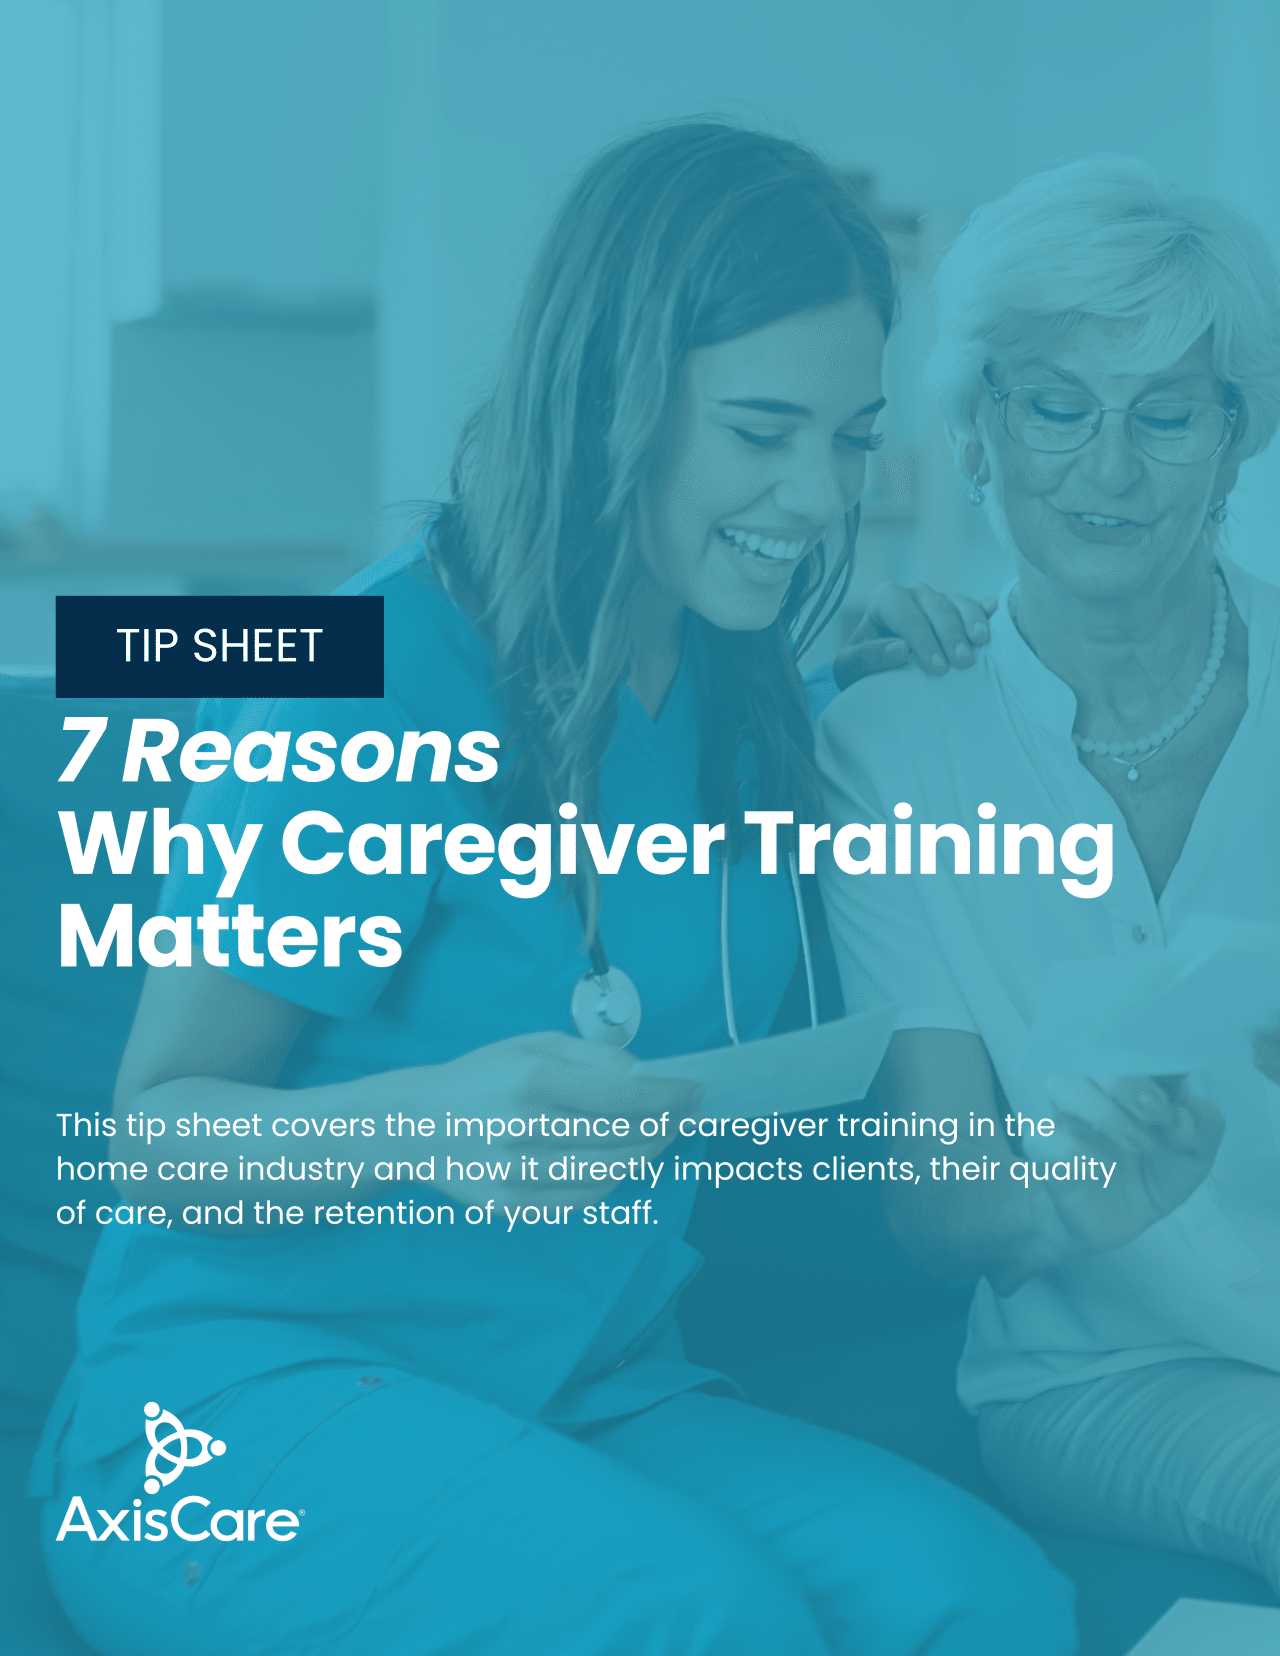 Tip Sheet: 7 Reasons Why Caregiver Training Matters